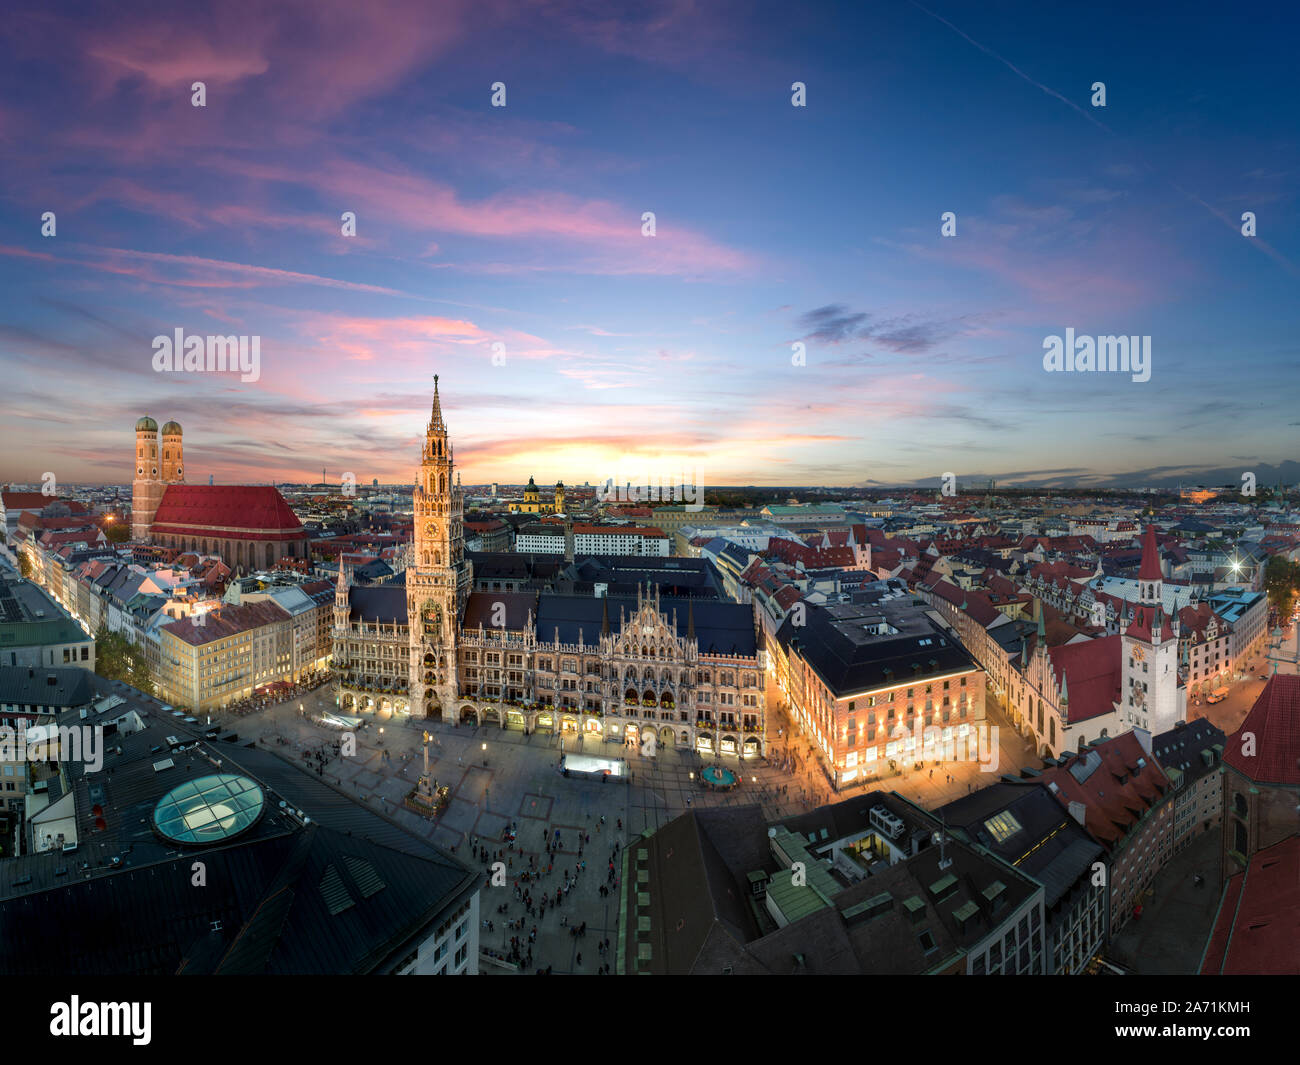 eautiful panorama of Munich city centre at sunset - Marienplatz, Church of our Lady, Old and New Town Hall Stock Photo